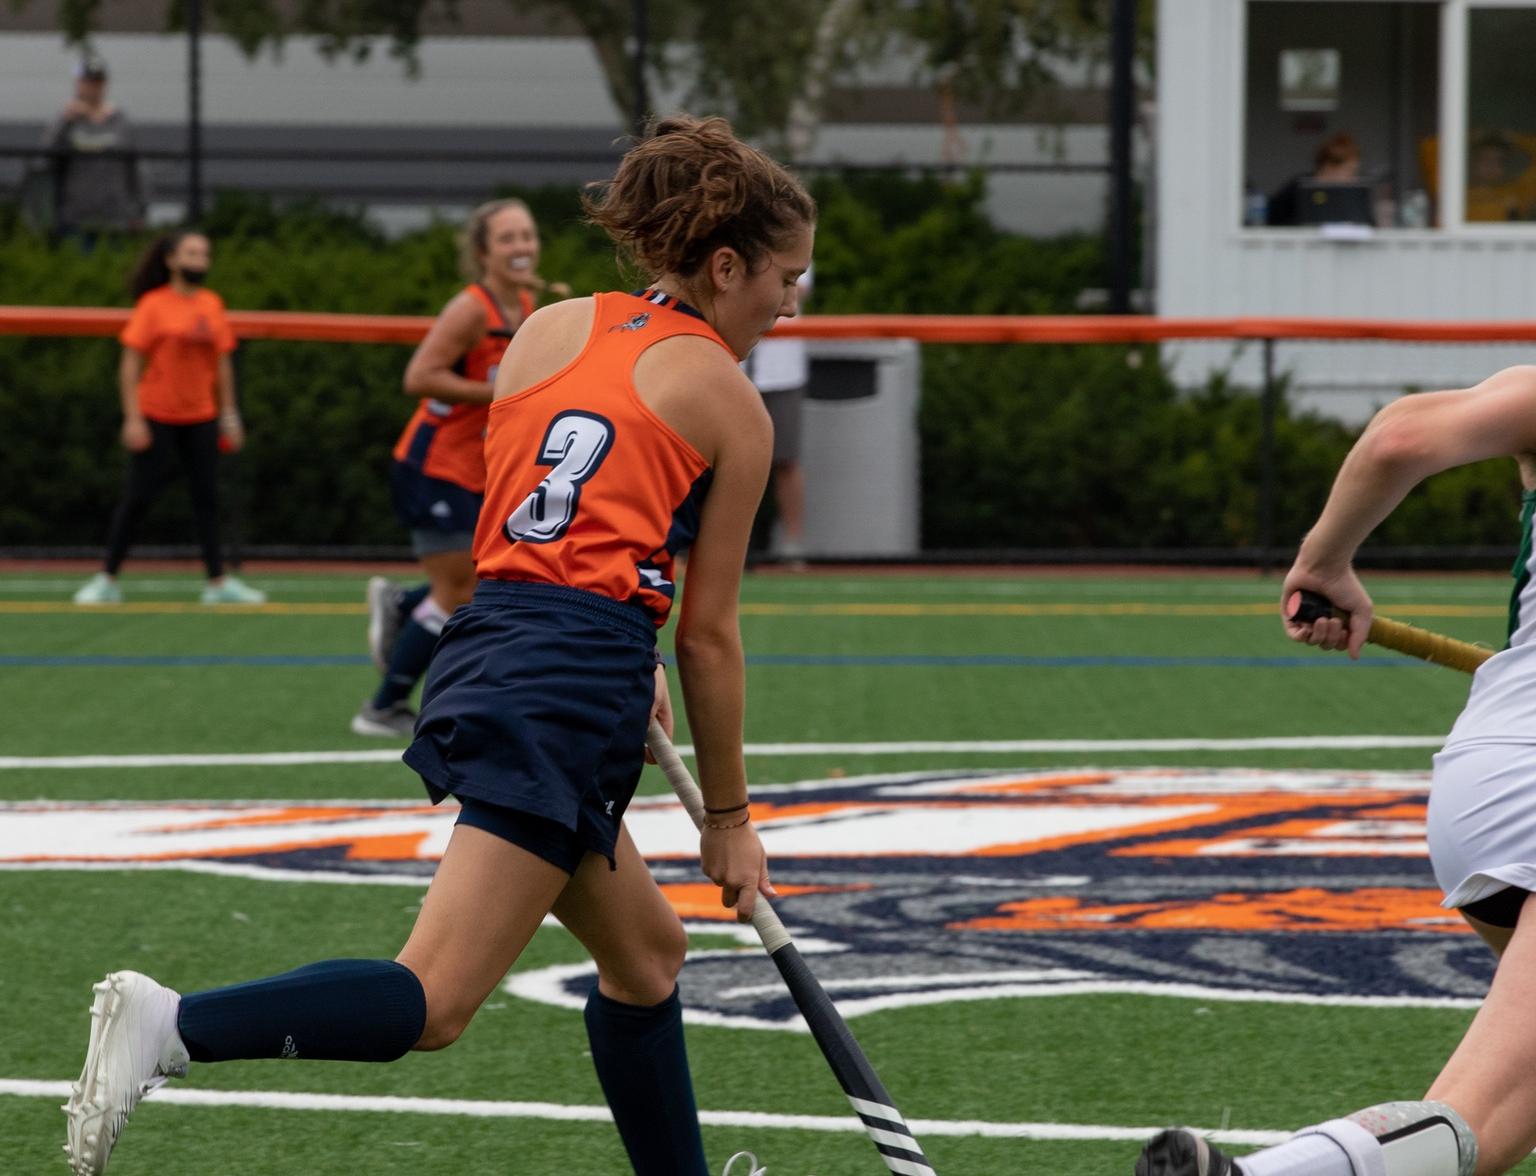 Mikayla and Melanie Mason Combine for Four Goals as Vikings Blank Corsairs 4-0